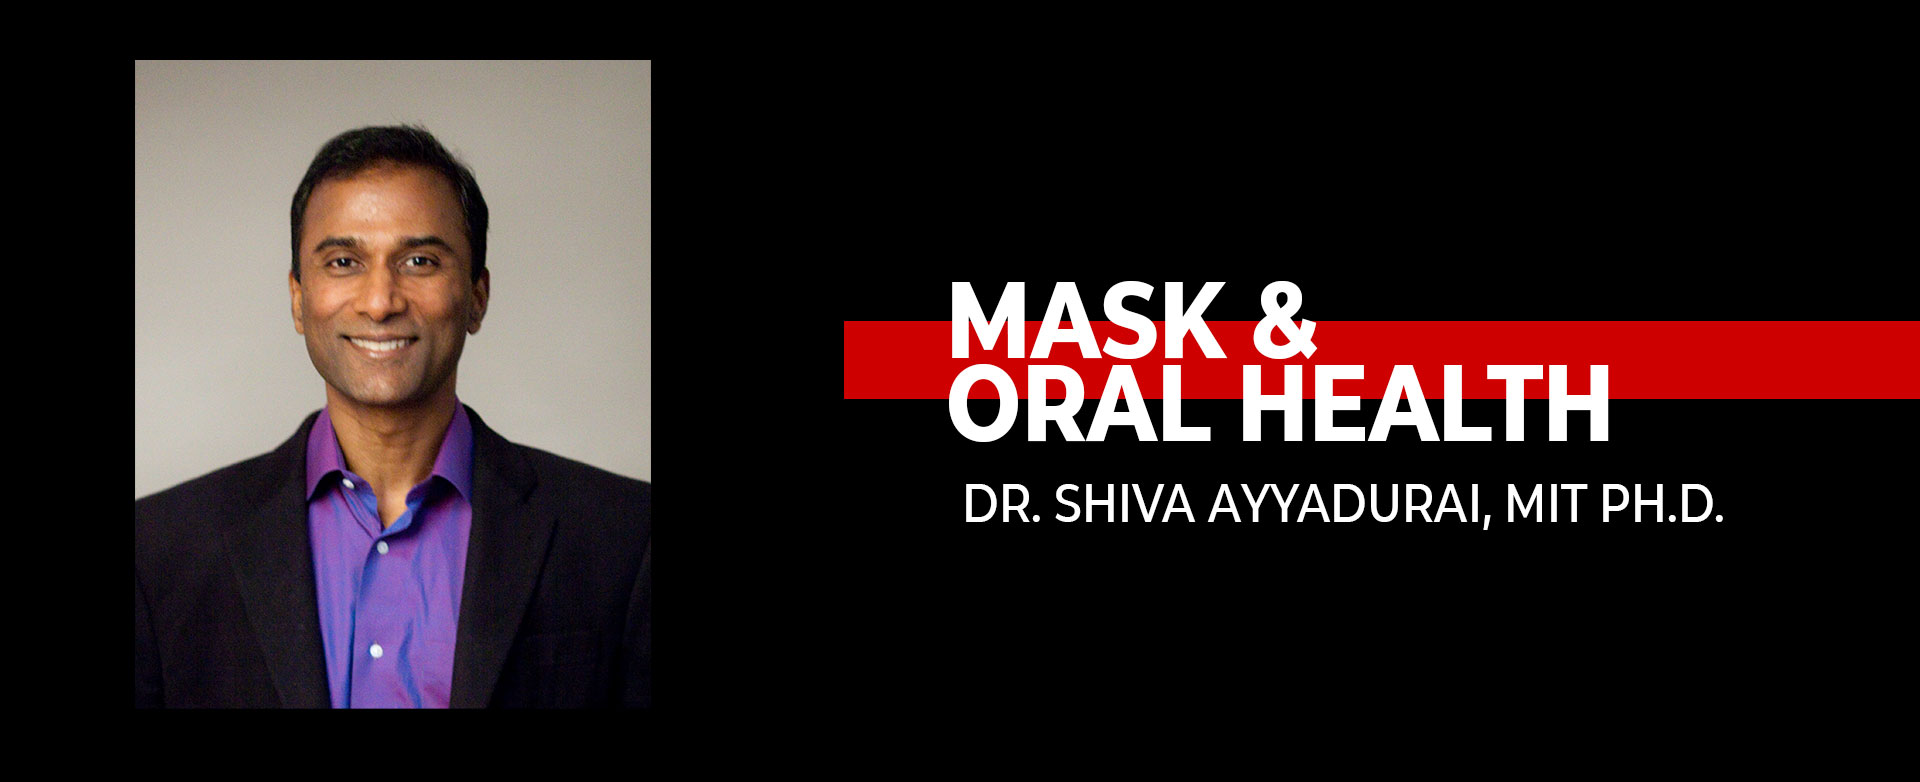 MyPatriotsNetwork-MIT Doctor Shows Scientific Proof Masks Don't Stop The Spread of Coronavirus